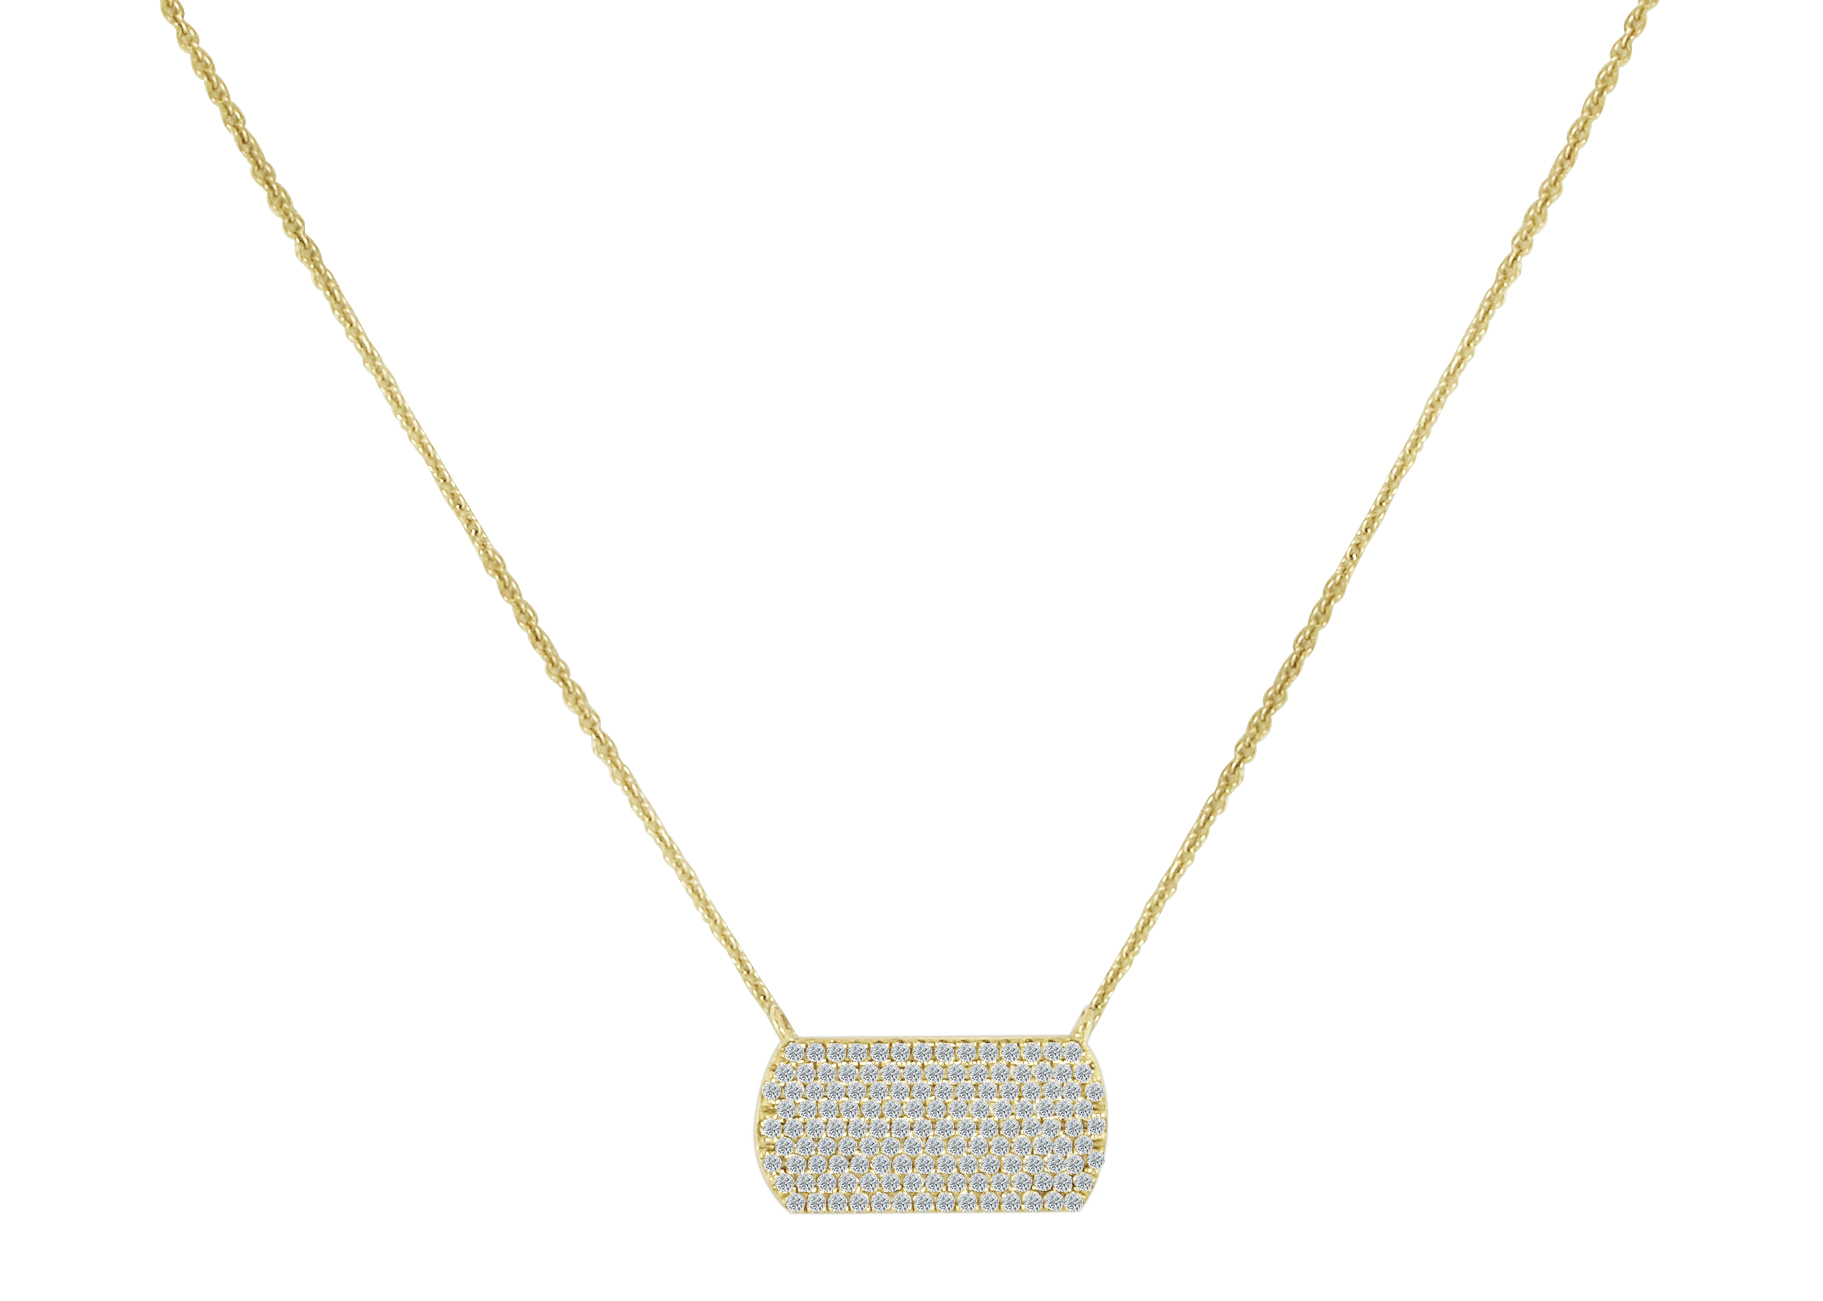 Necklace image